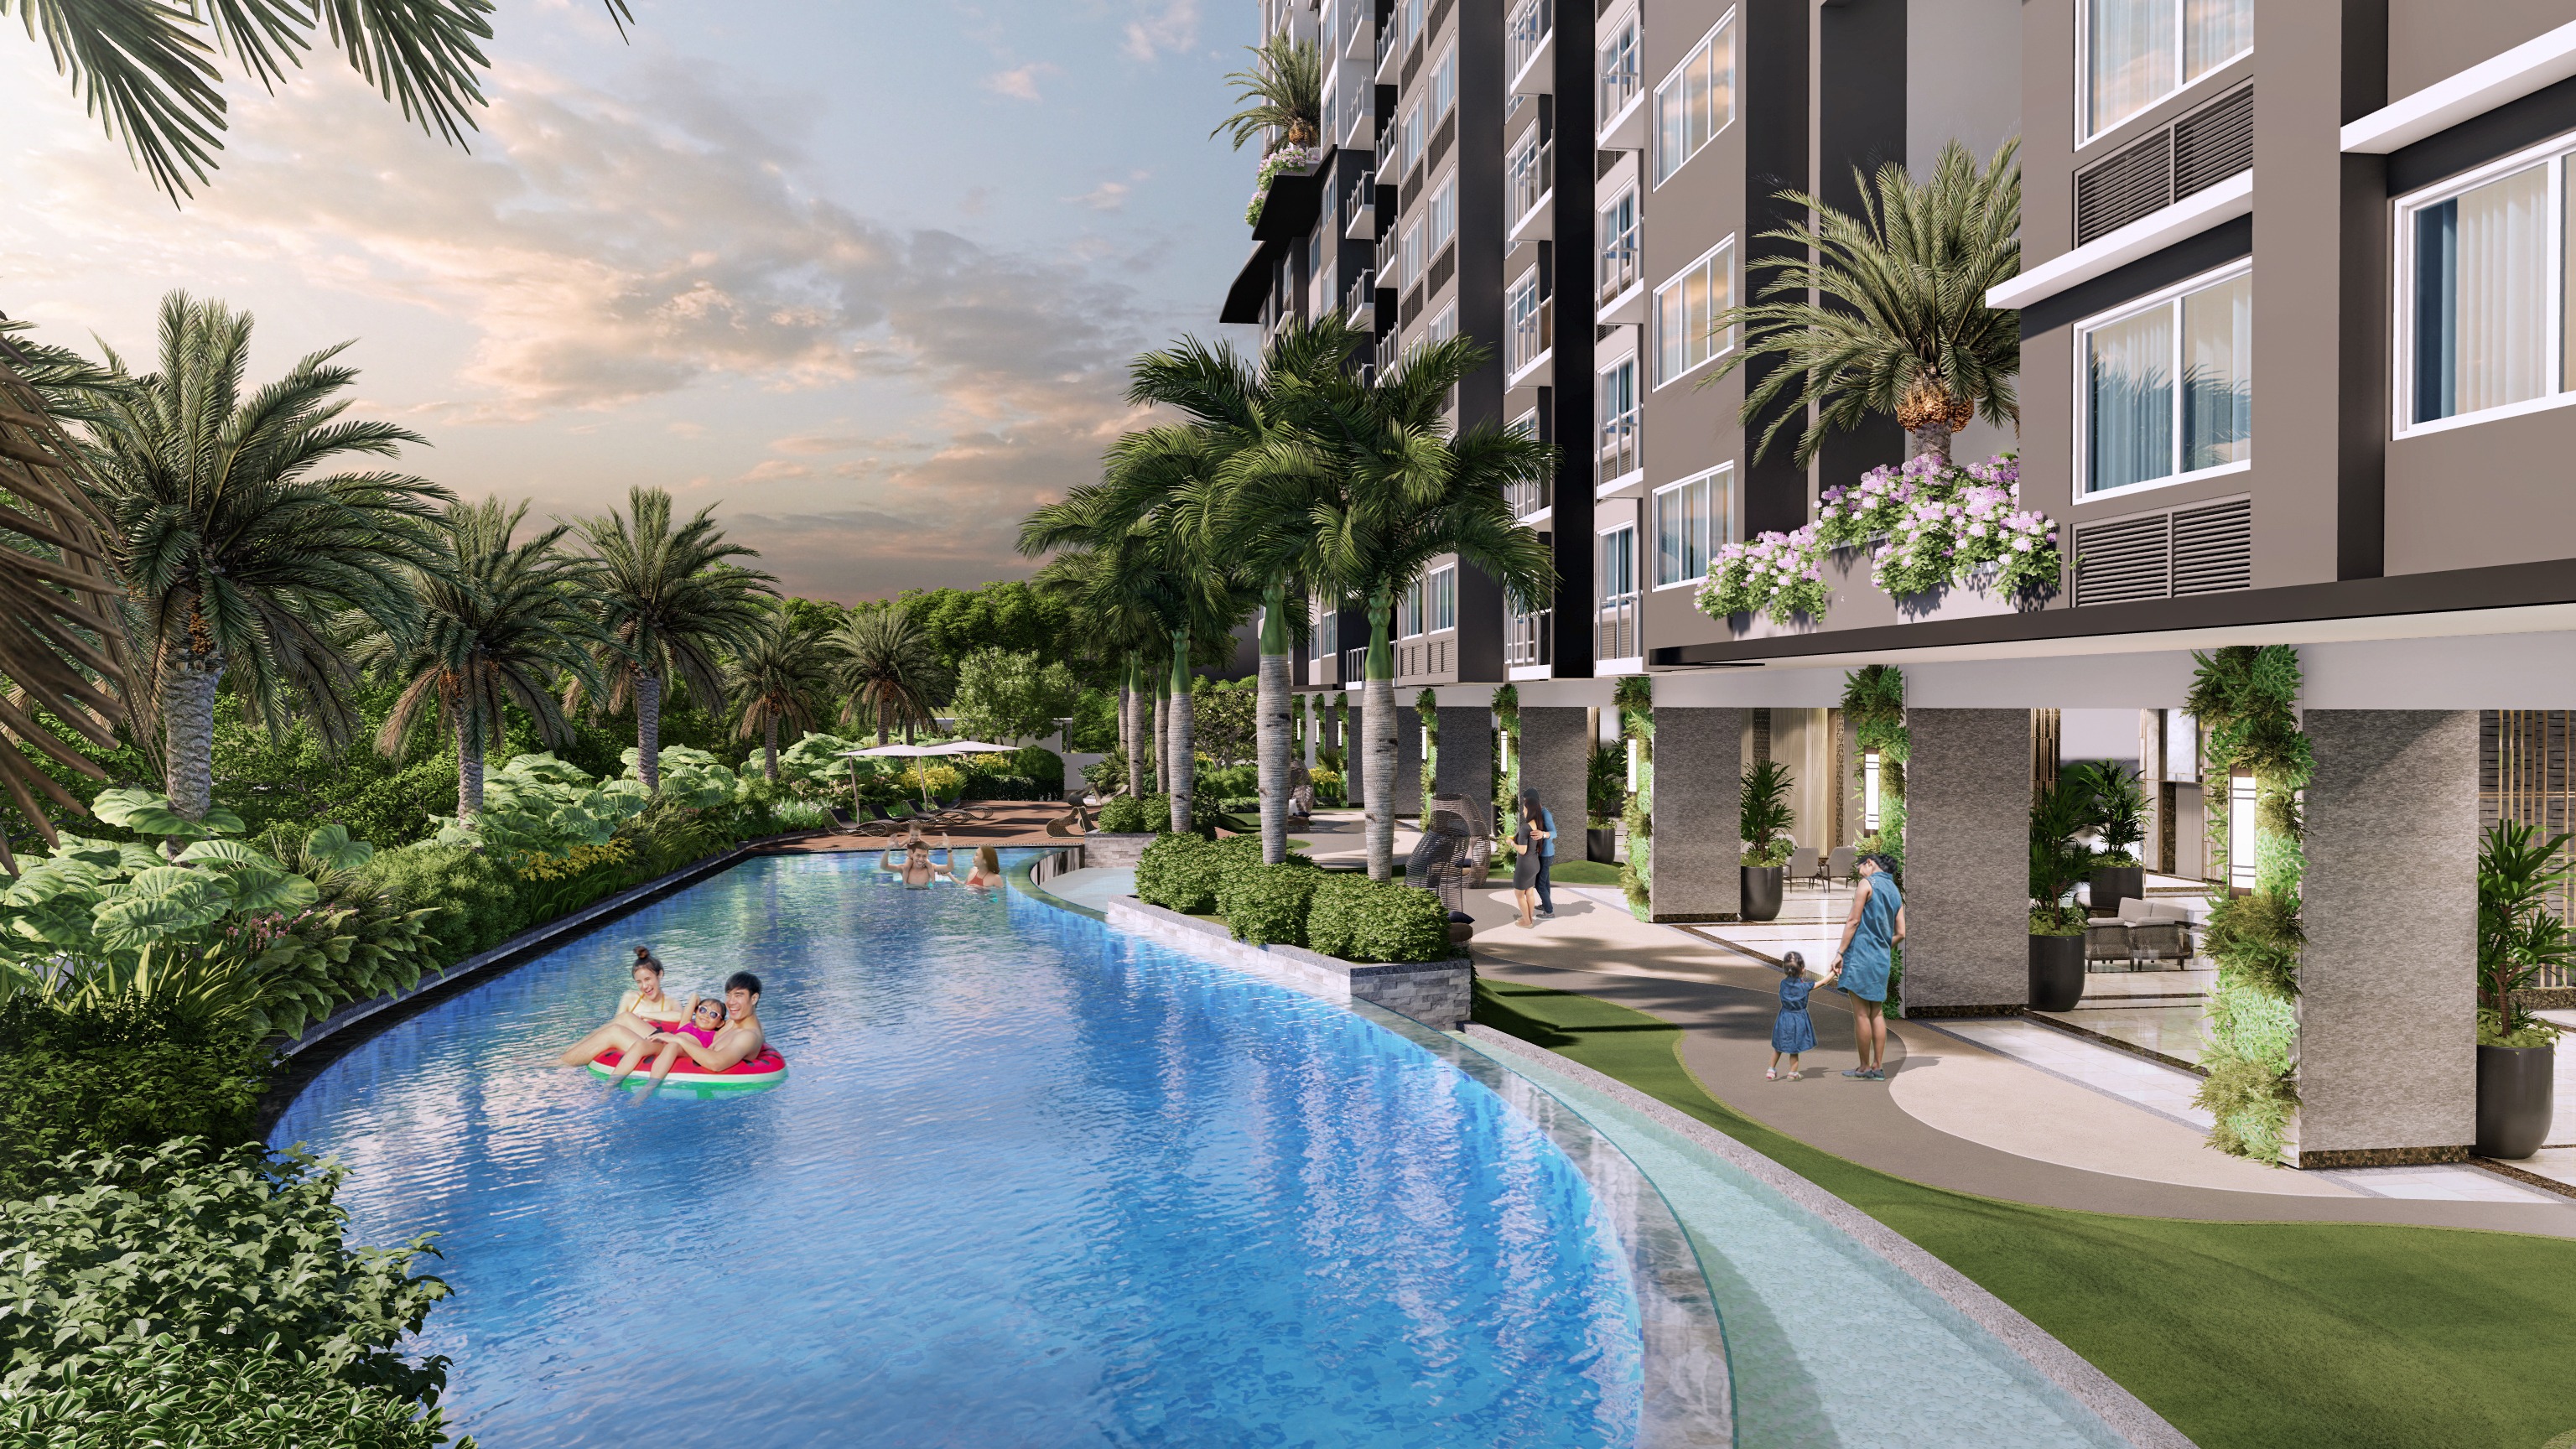 fortis-residences-an-upscale-blend-of-convenience-and-resort-style-living-in-the-city-1695015493162